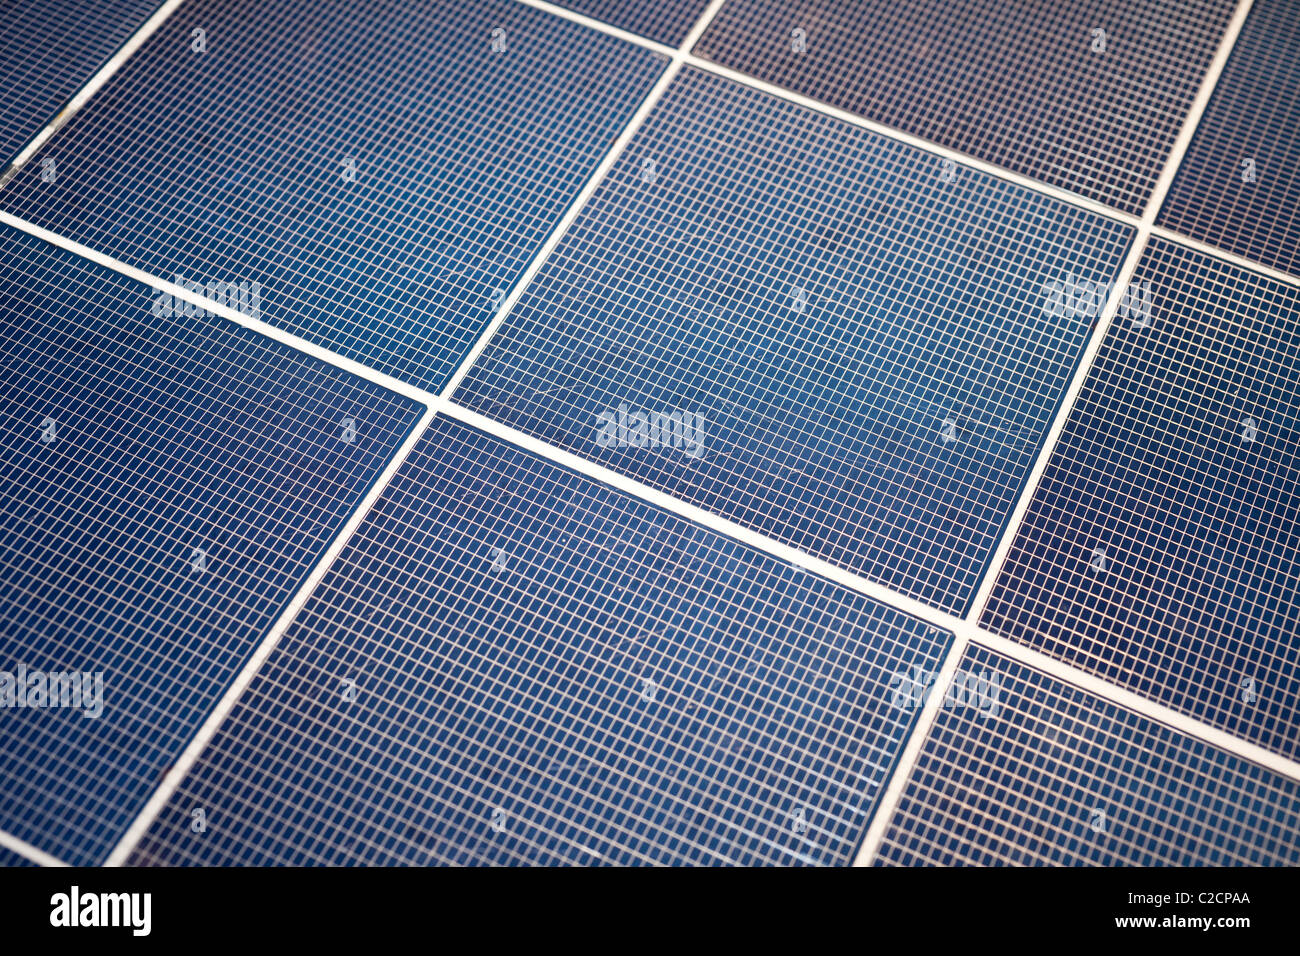 solar-cell panel for background Stock Photo